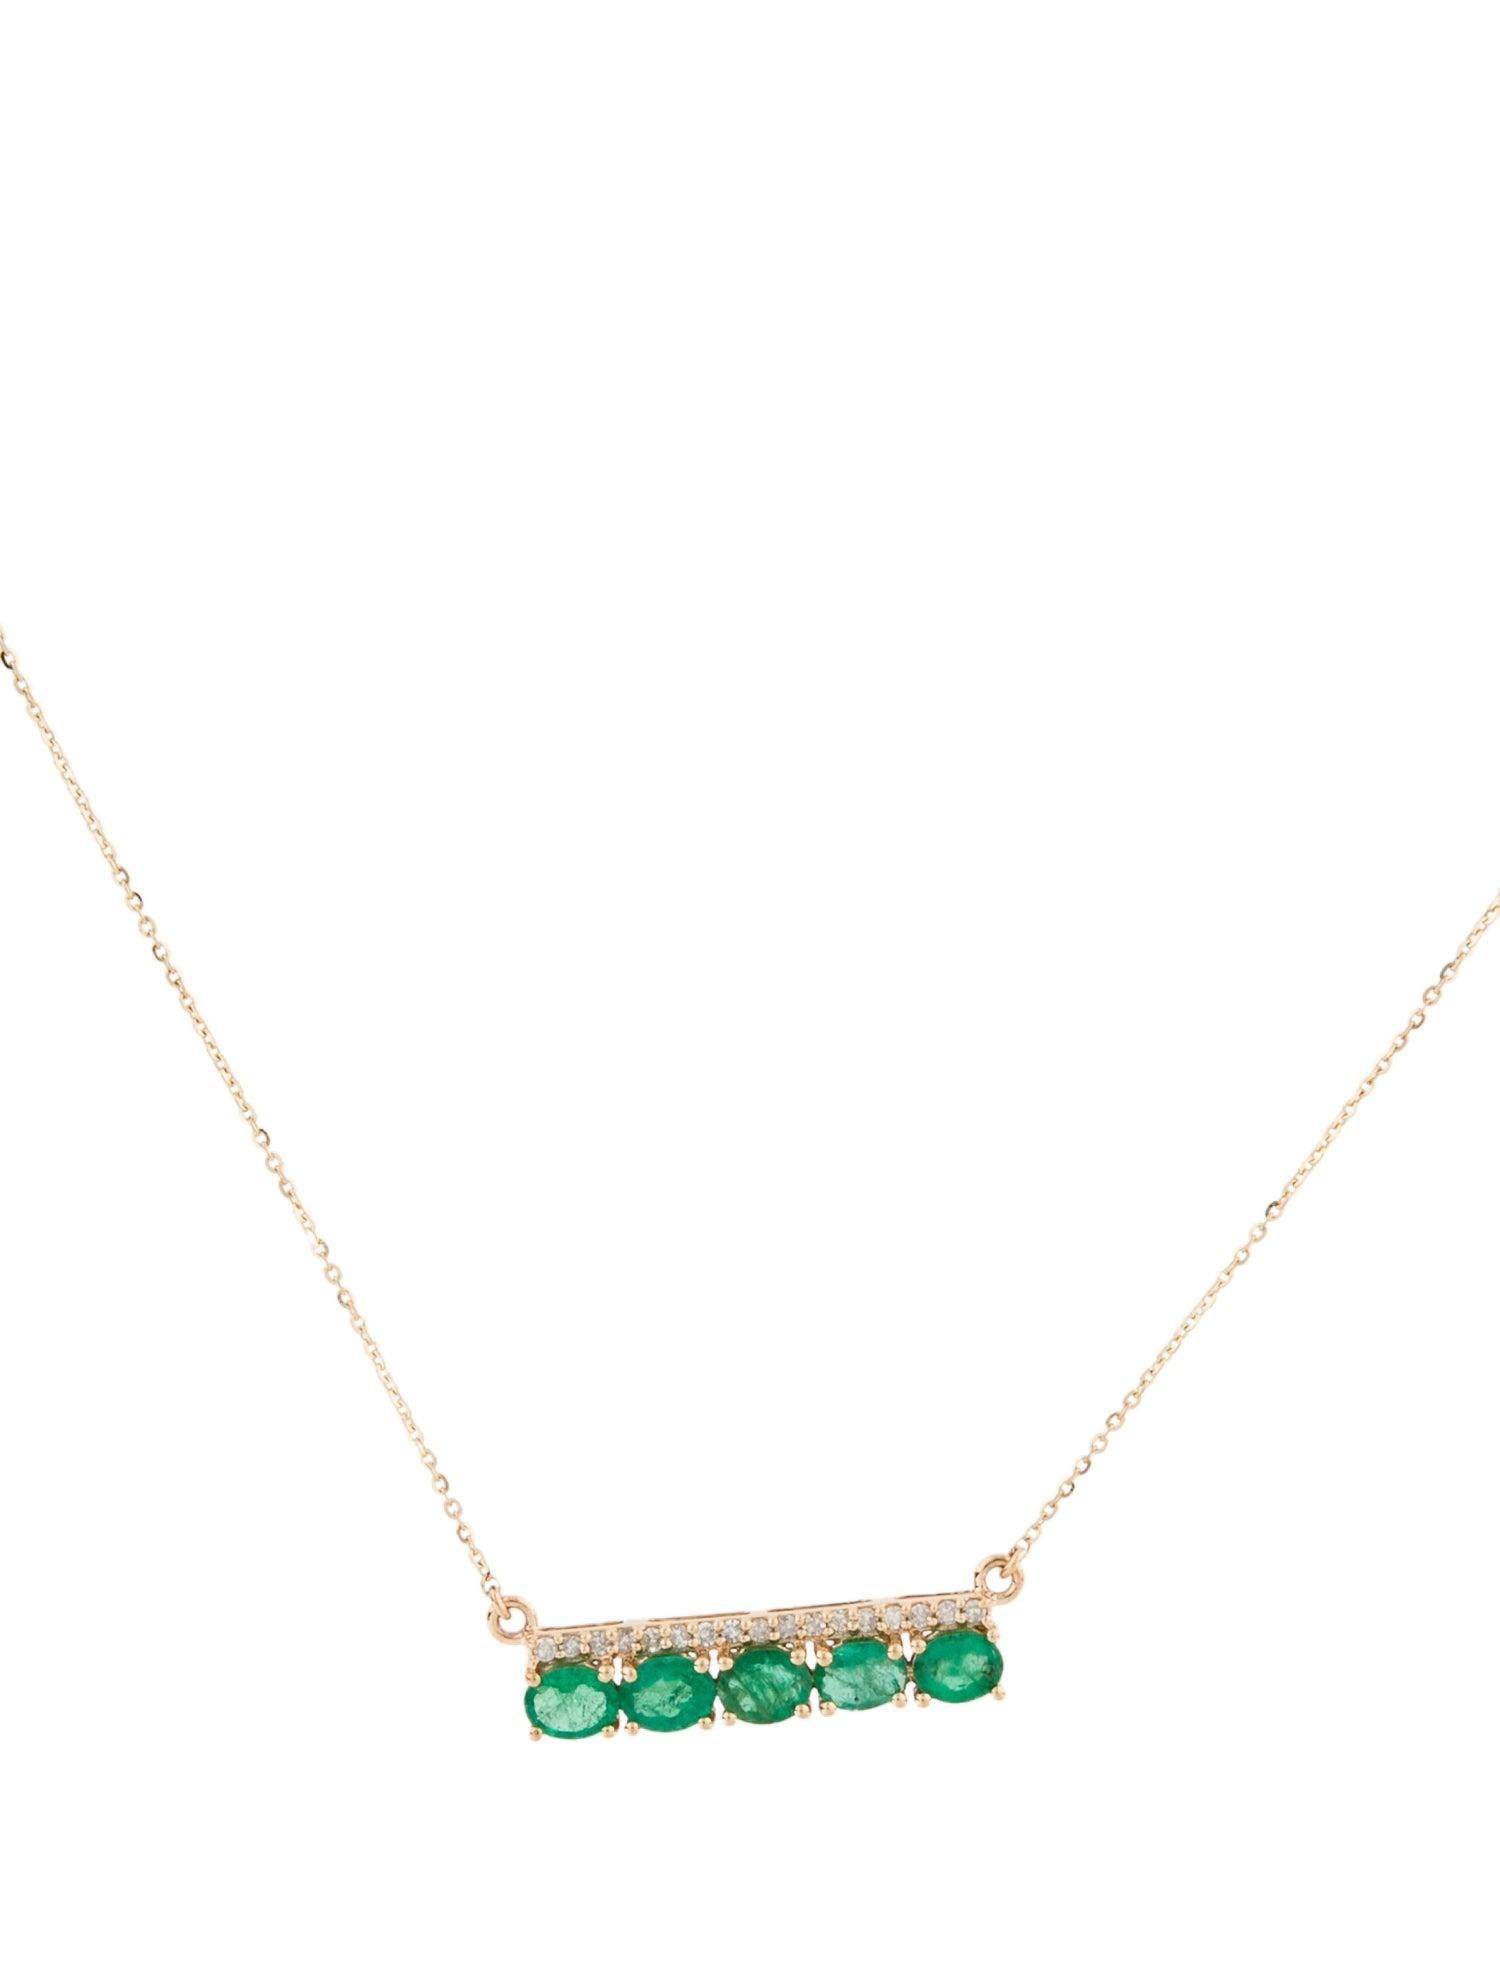 14K Emerald & Diamond Bar Pendant Necklace - Exquisite Gemstone Statement Piece In New Condition For Sale In Holtsville, NY